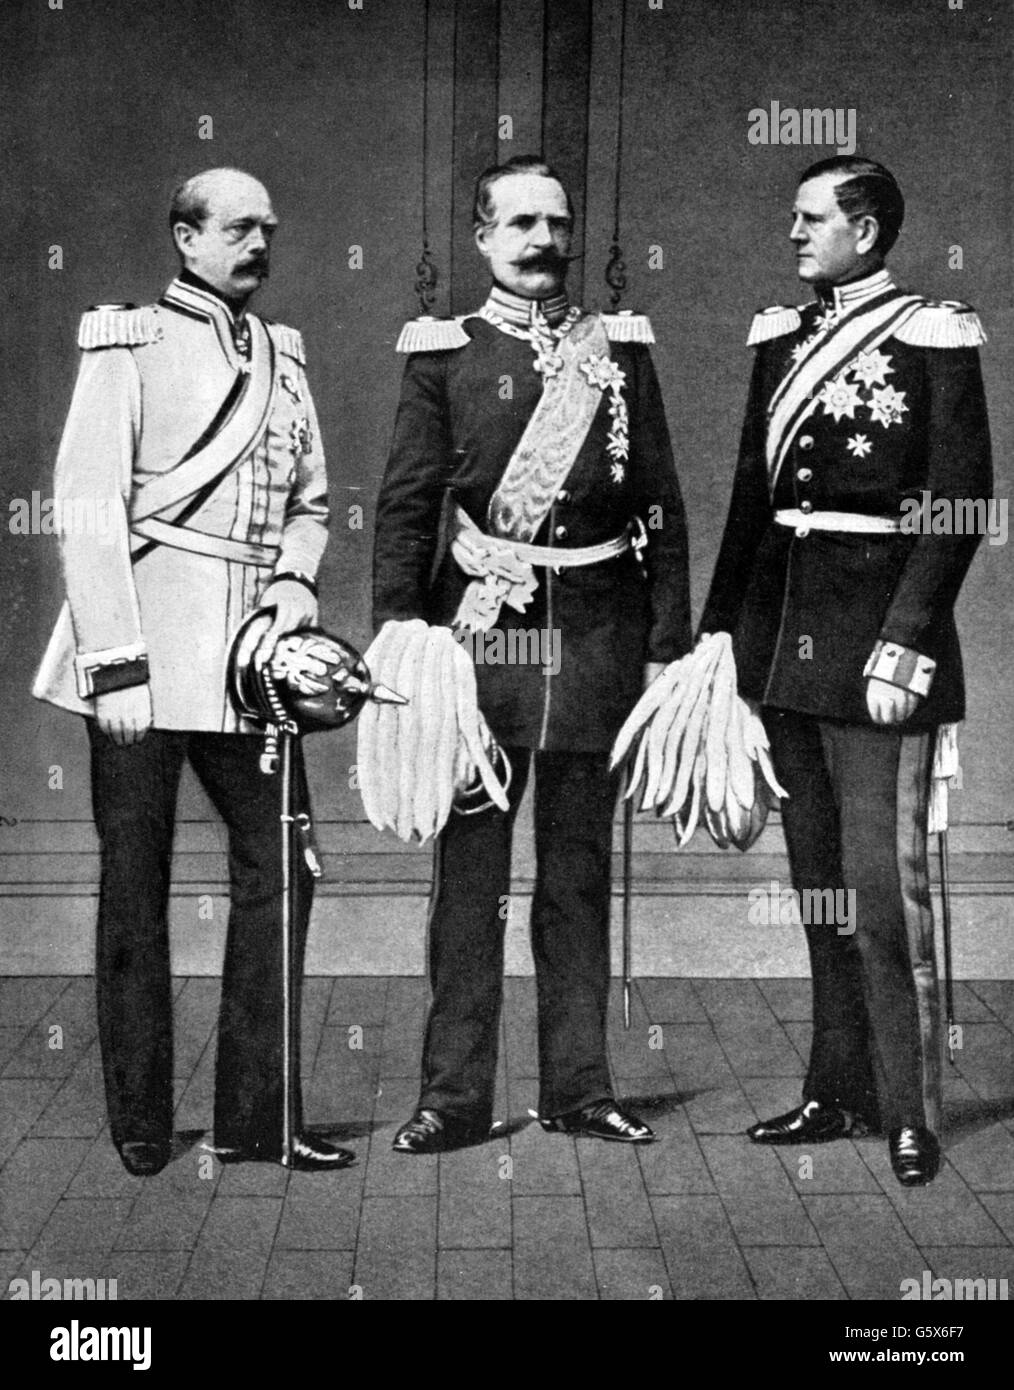 Bismarck, Otto von, 1.4.1815 - 30.7.1898, German politician, Prussian Prime Minister 1862 - 1890, full length, with minister of war Albrecht von Roon and Chief of General staff Helmuth von Moltke, 1861, Stock Photo